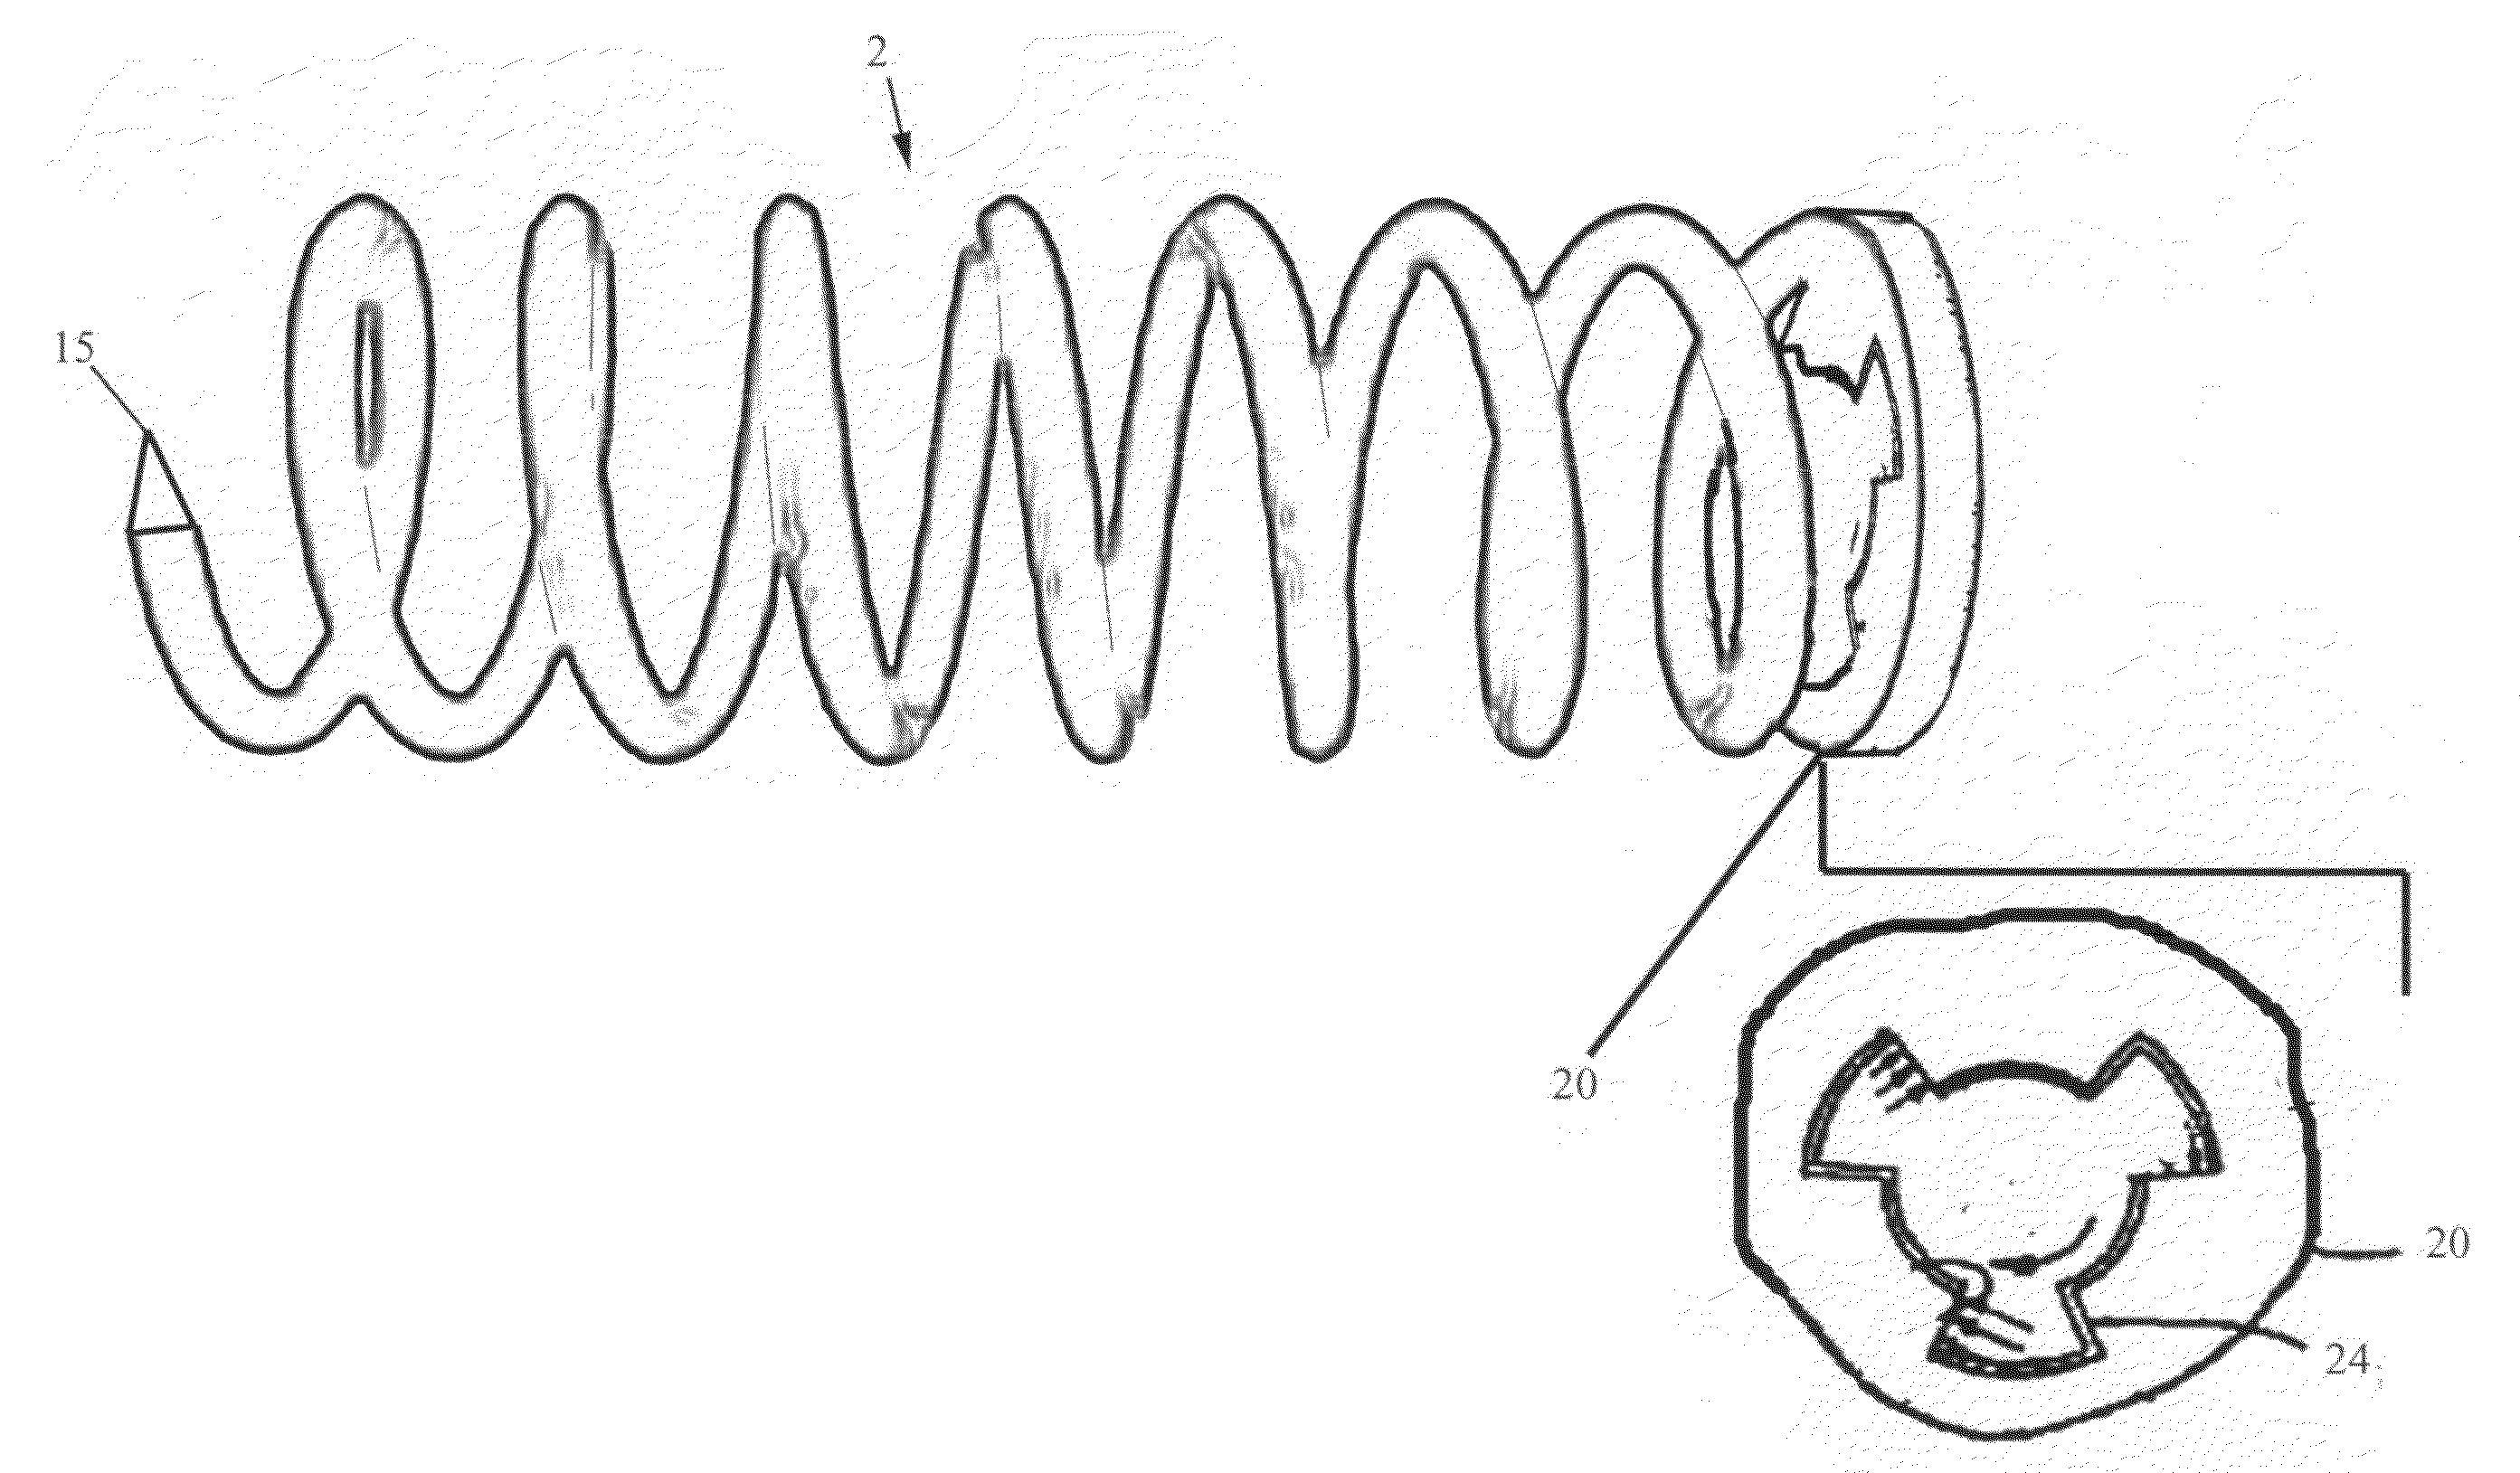 Intervertebral disc support coil and screw applicator